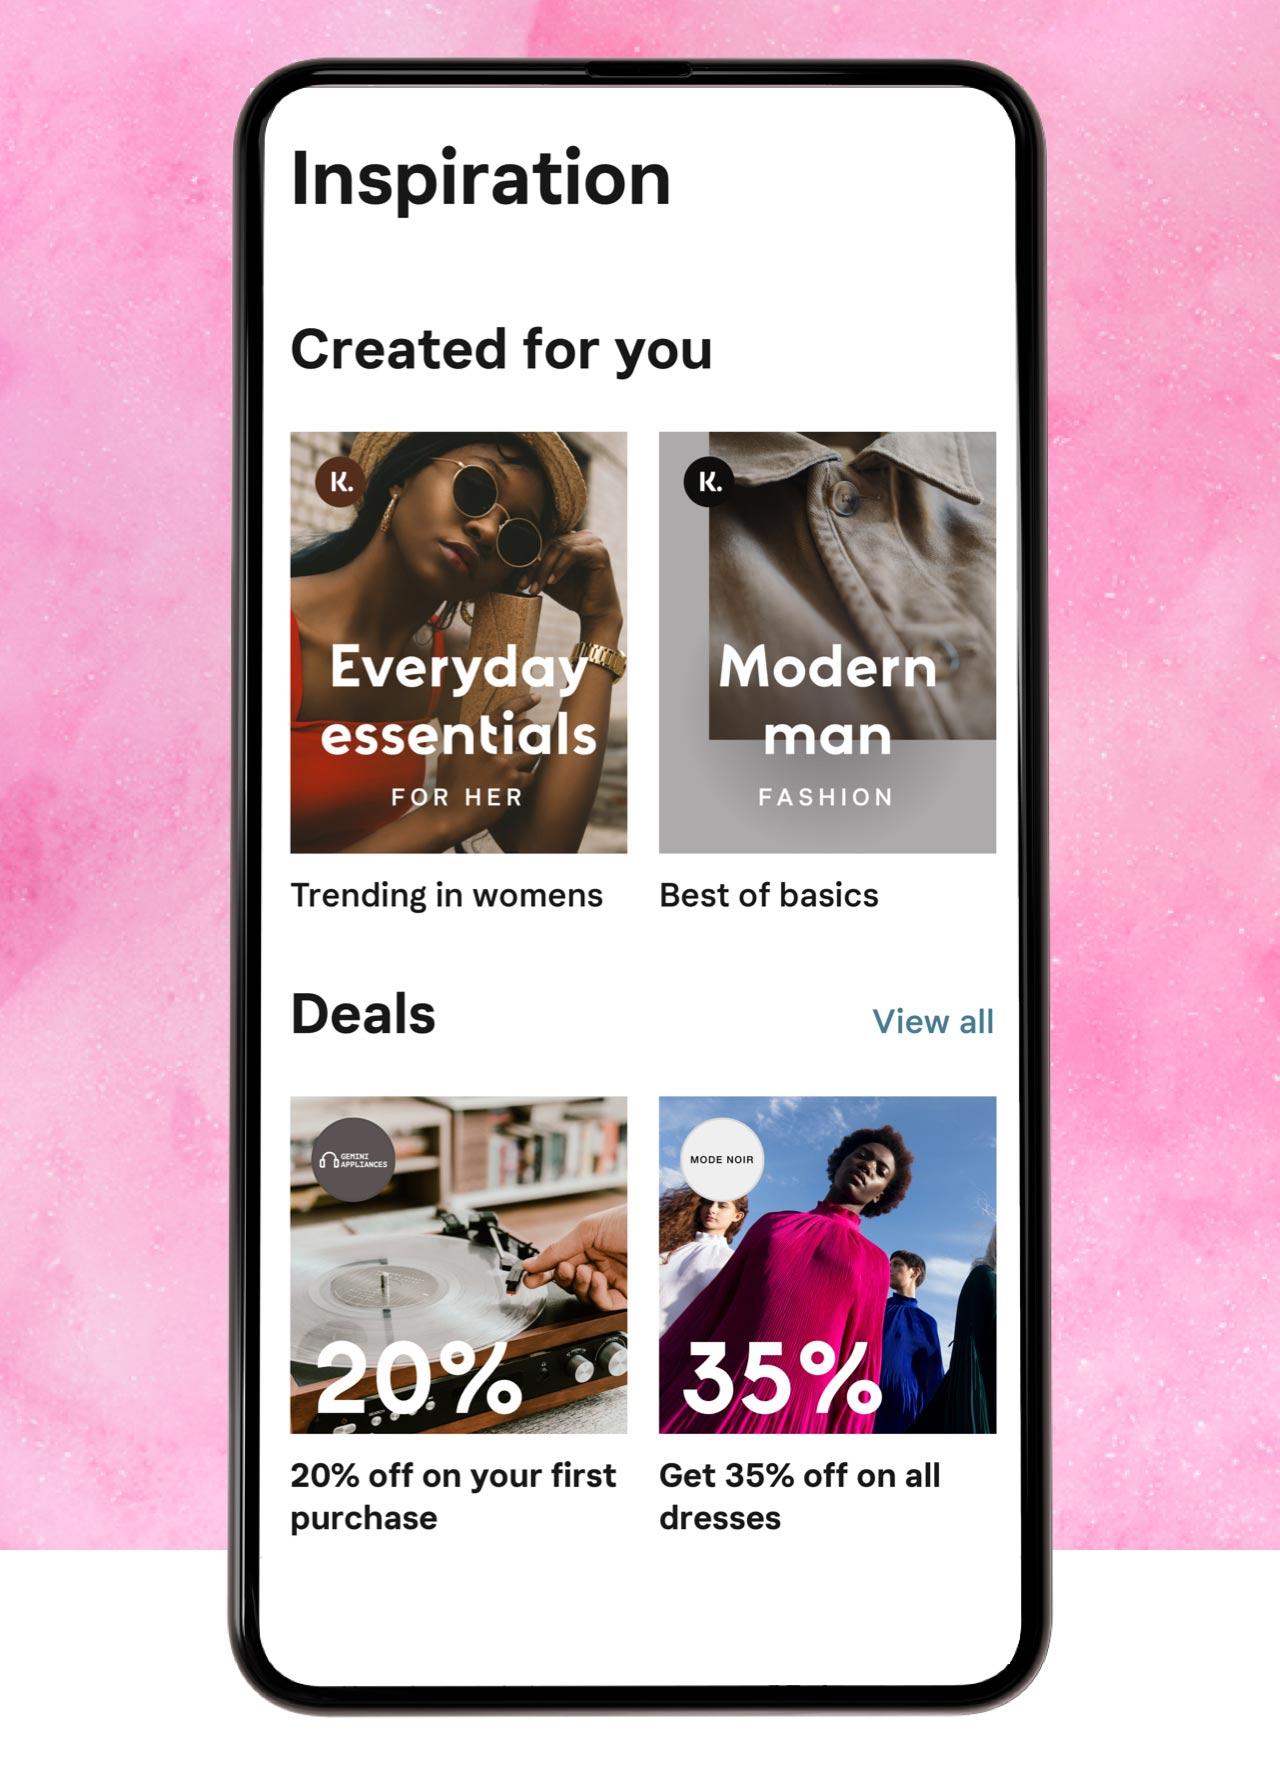 Shopping inspiration in the app